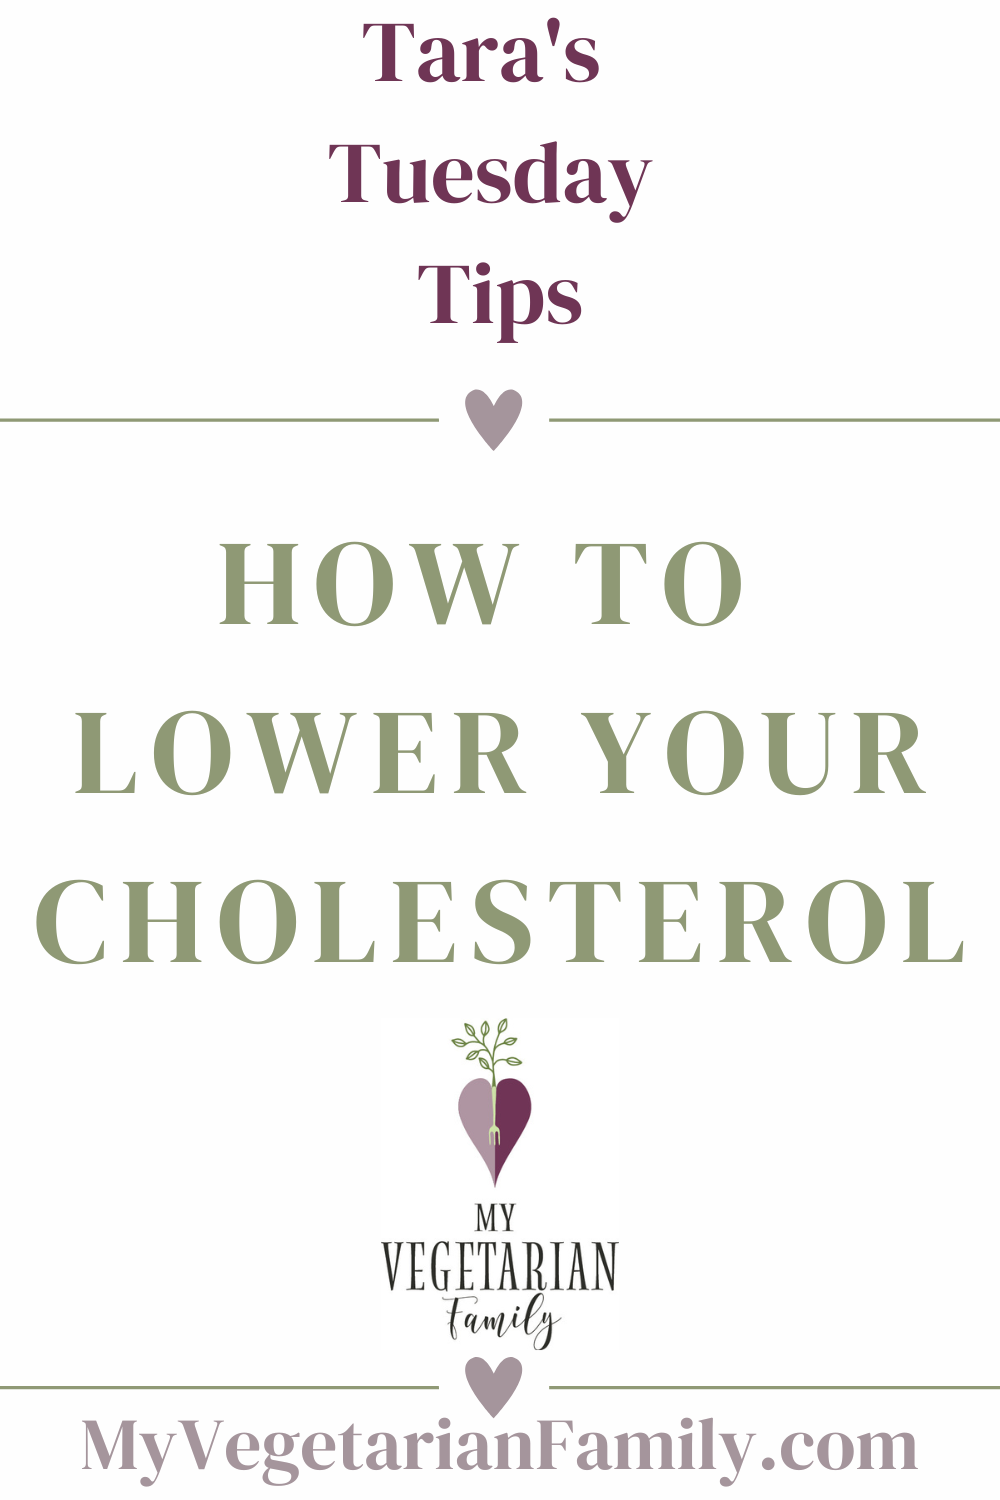 How to Lower Your Cholesterol | My Vegetarian Family #cholesteroltips #tarastuesdaytips